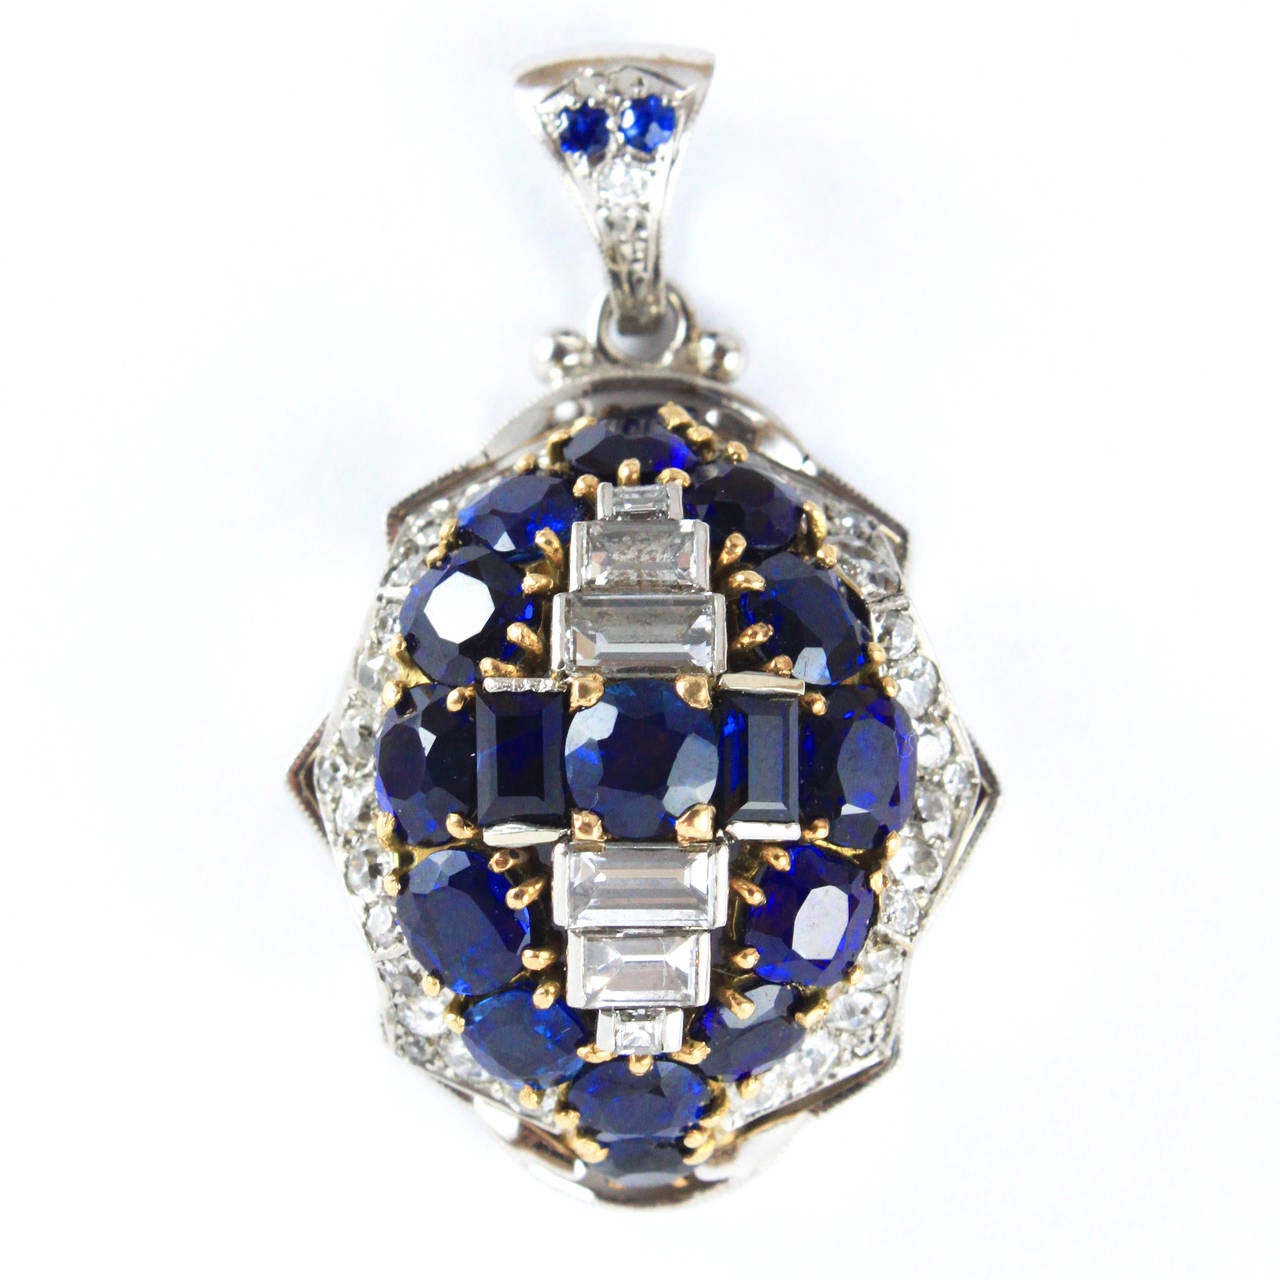 A dome shaped pendant set with diamonds and sapphires in 18k white and yellow gold. The old cut diamonds and diamond baguettes weigh ca. 2ct and the intense blue sapphires weigh ca. 7ct. The base of the pendant has intricate design carvings, it is